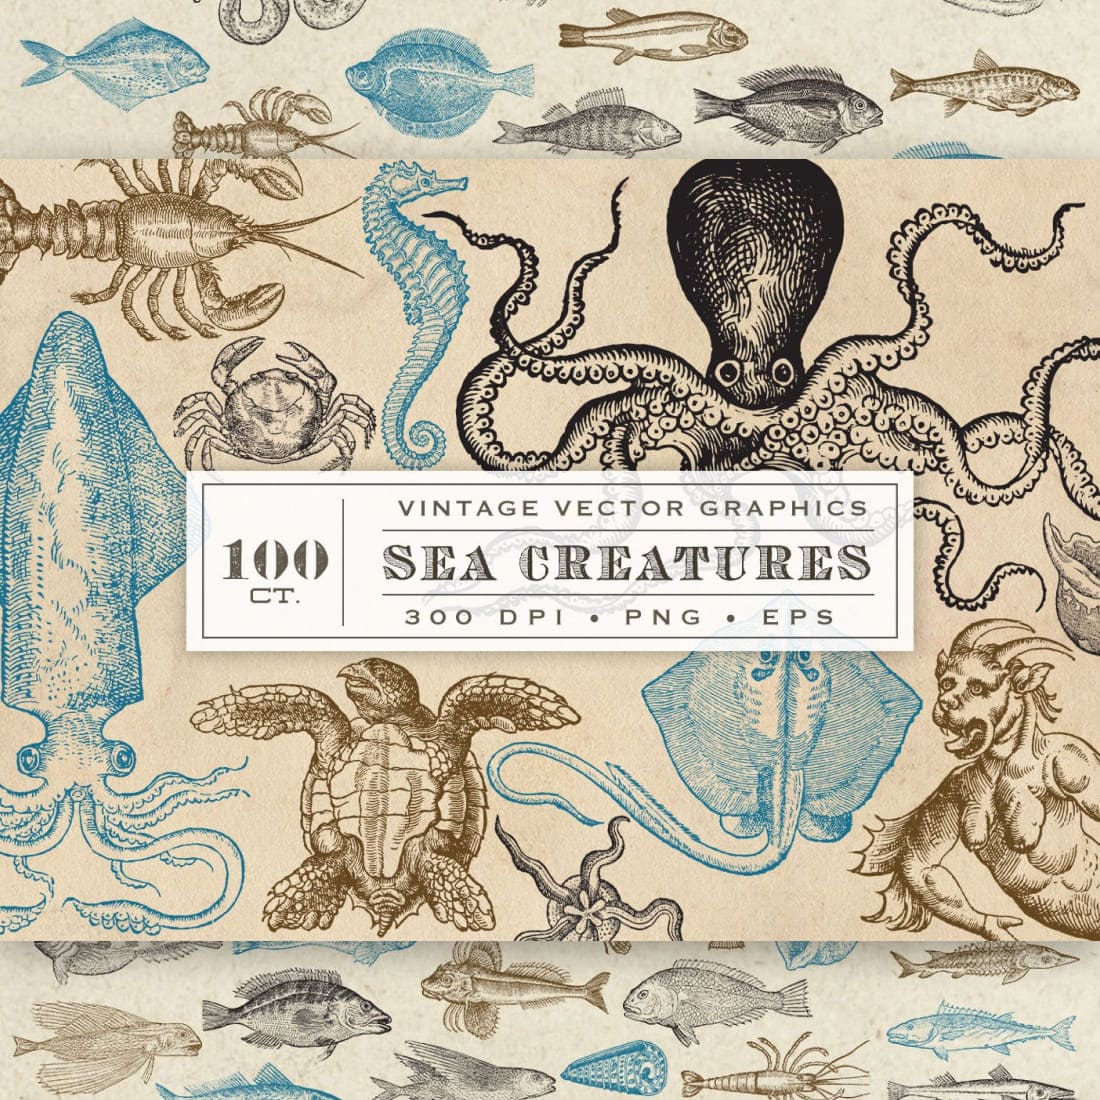 Antique Sea Creatures & Monsters cover image.